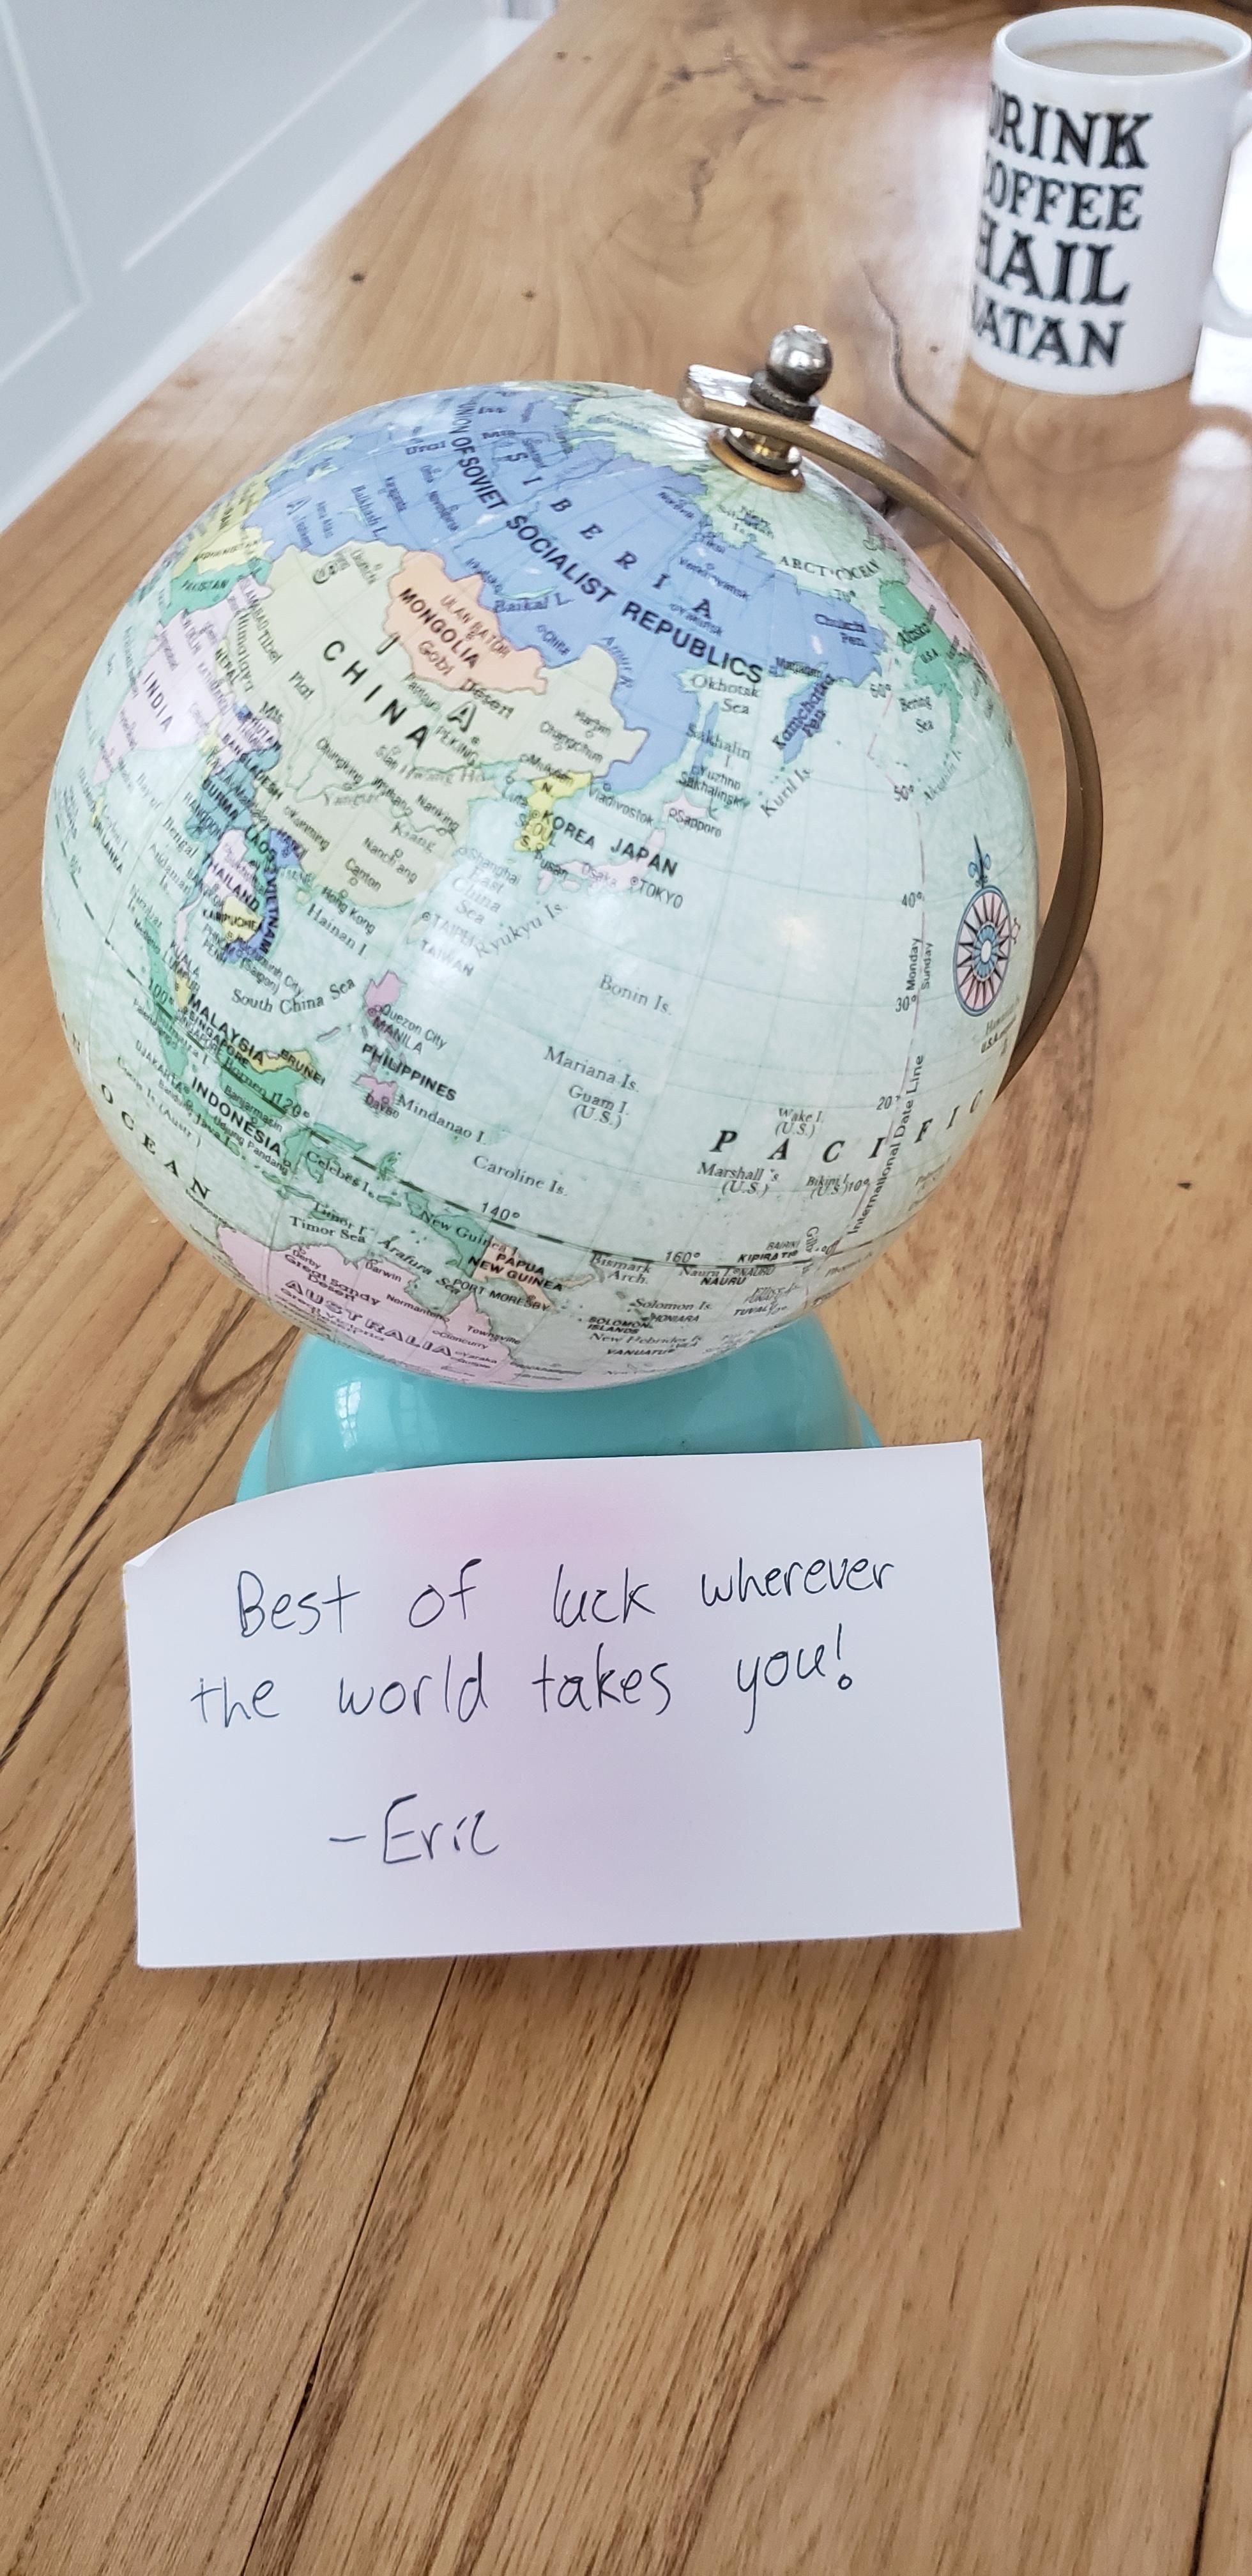 My coworker is a flat earther and it's his last day